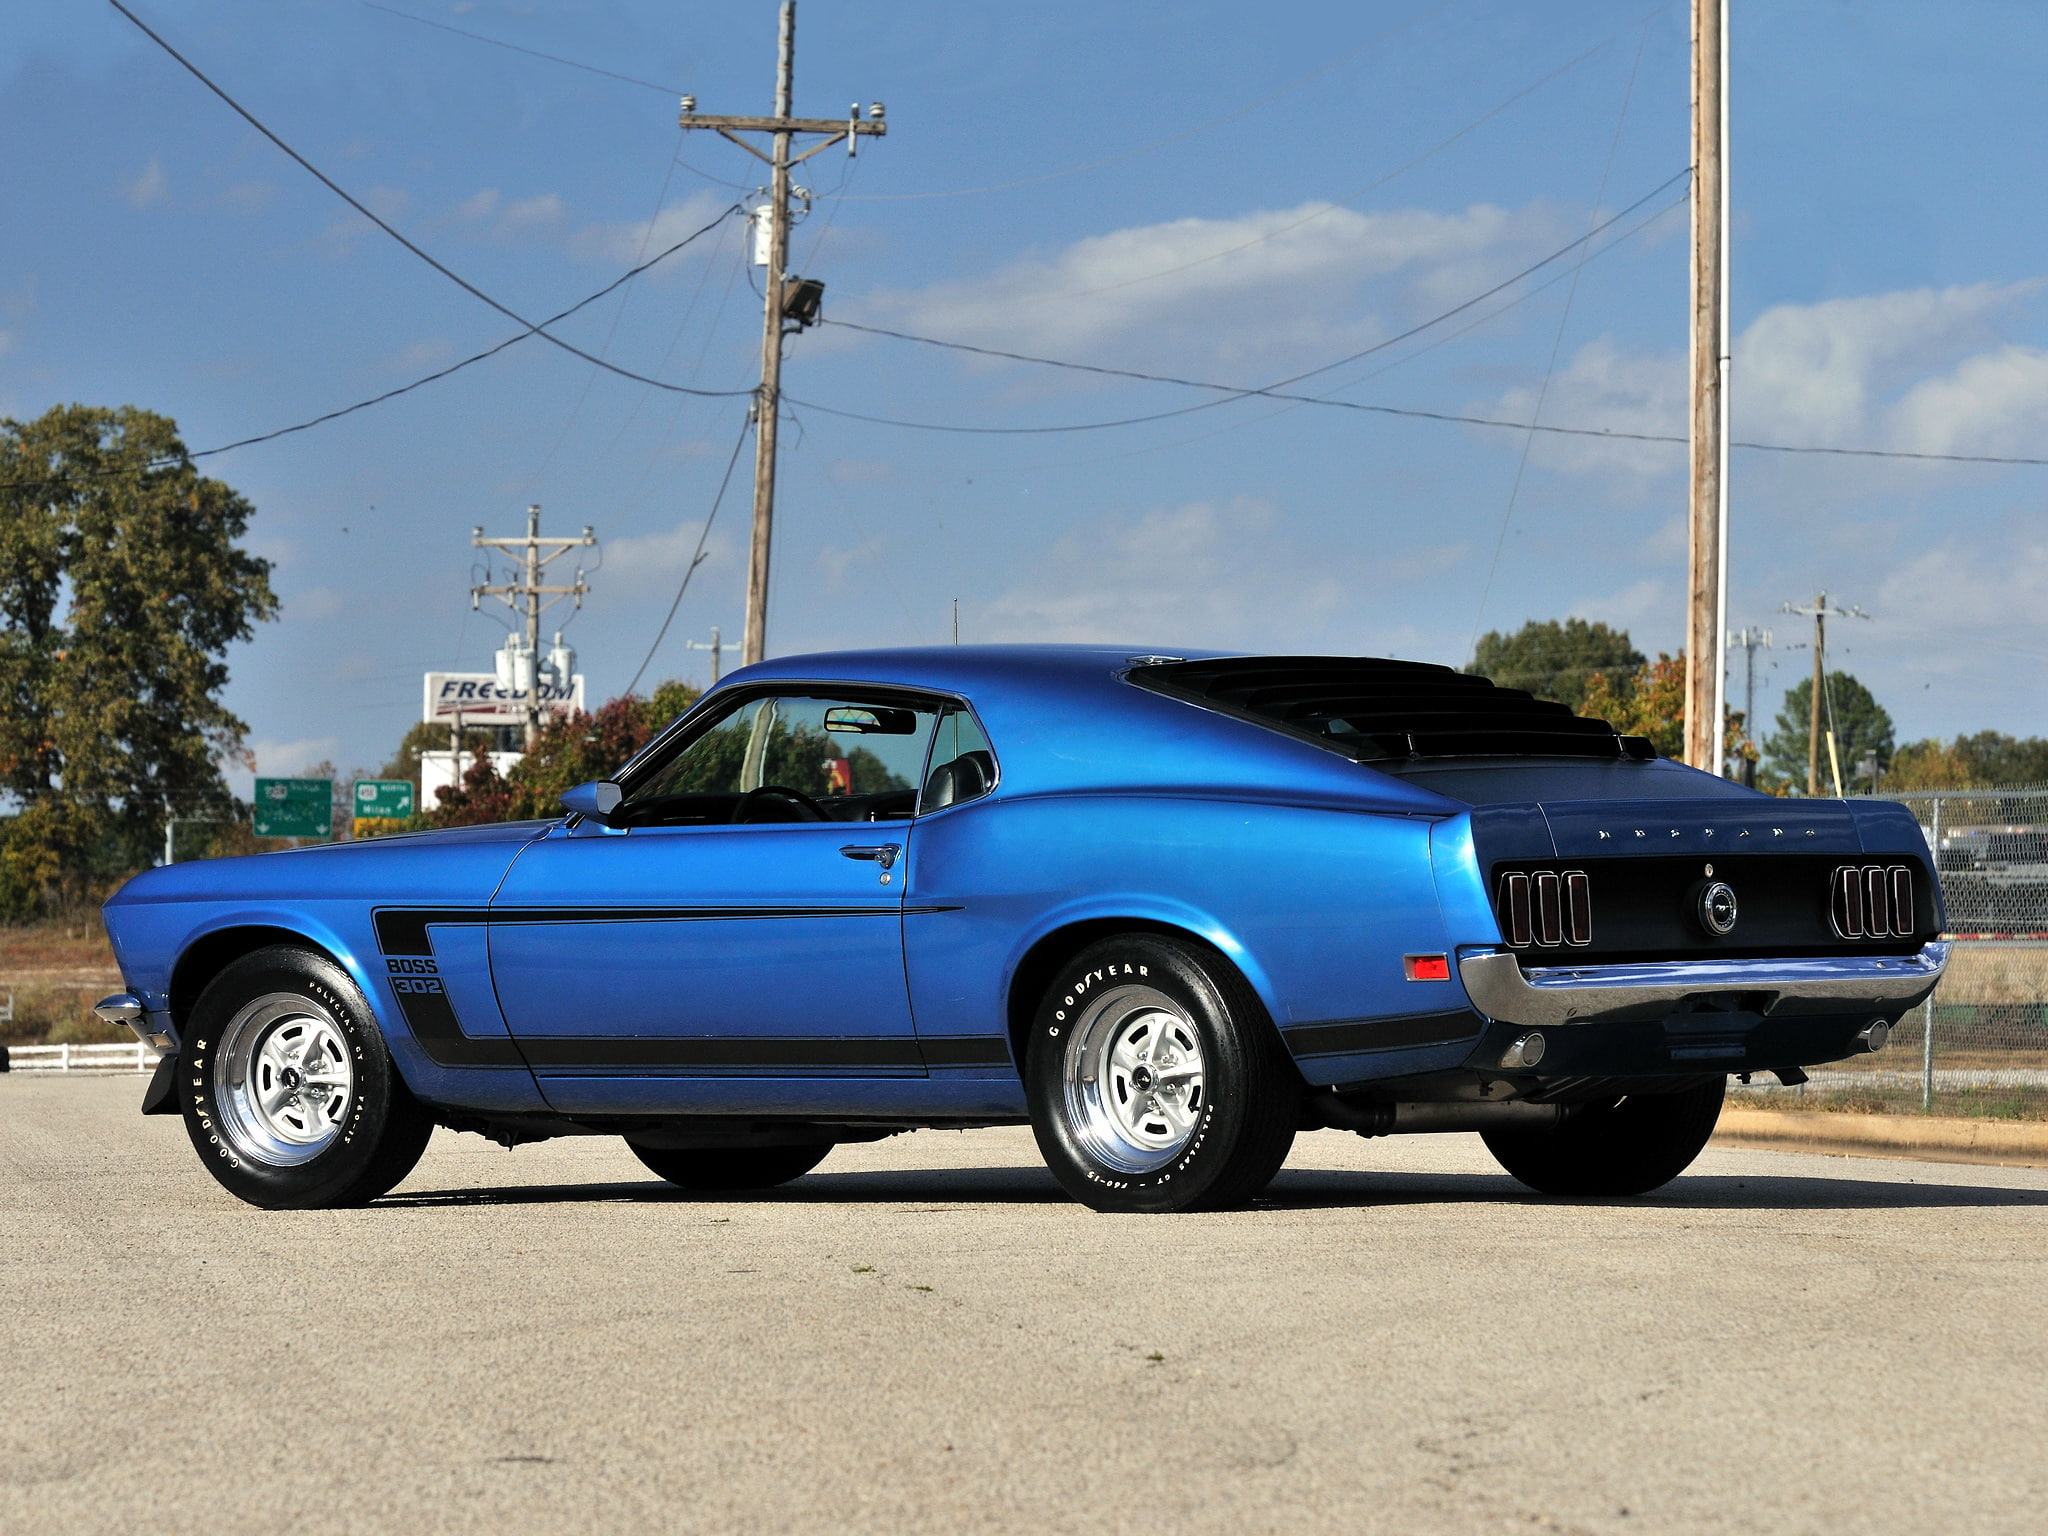 1969, 302, boss, classic, ford, muscle, mustang